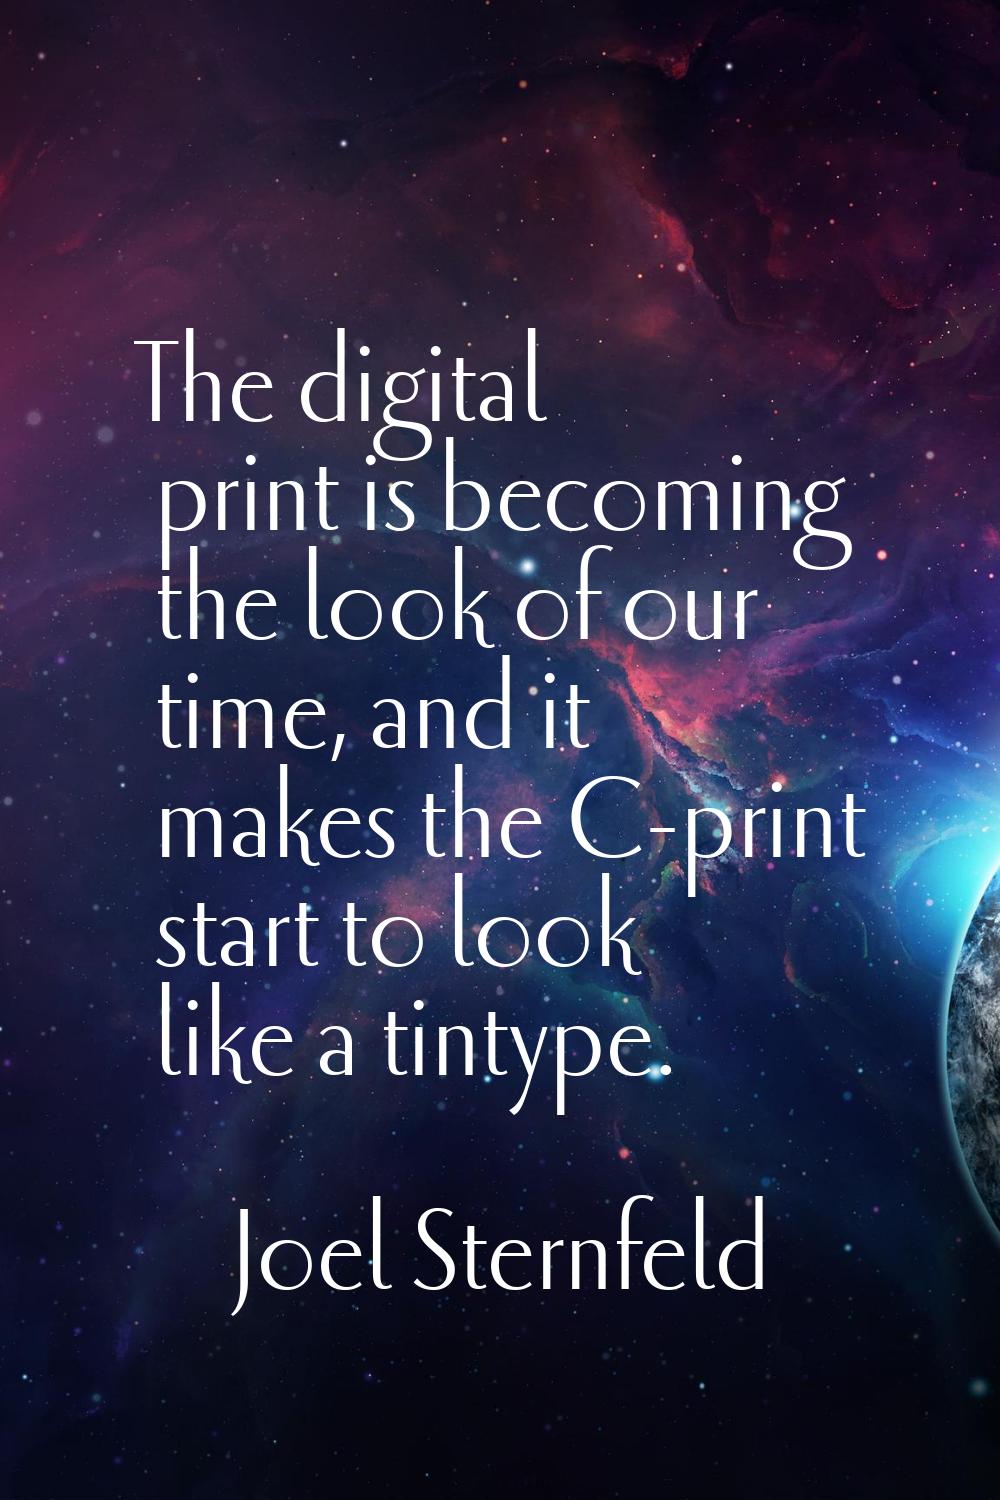 The digital print is becoming the look of our time, and it makes the C-print start to look like a t